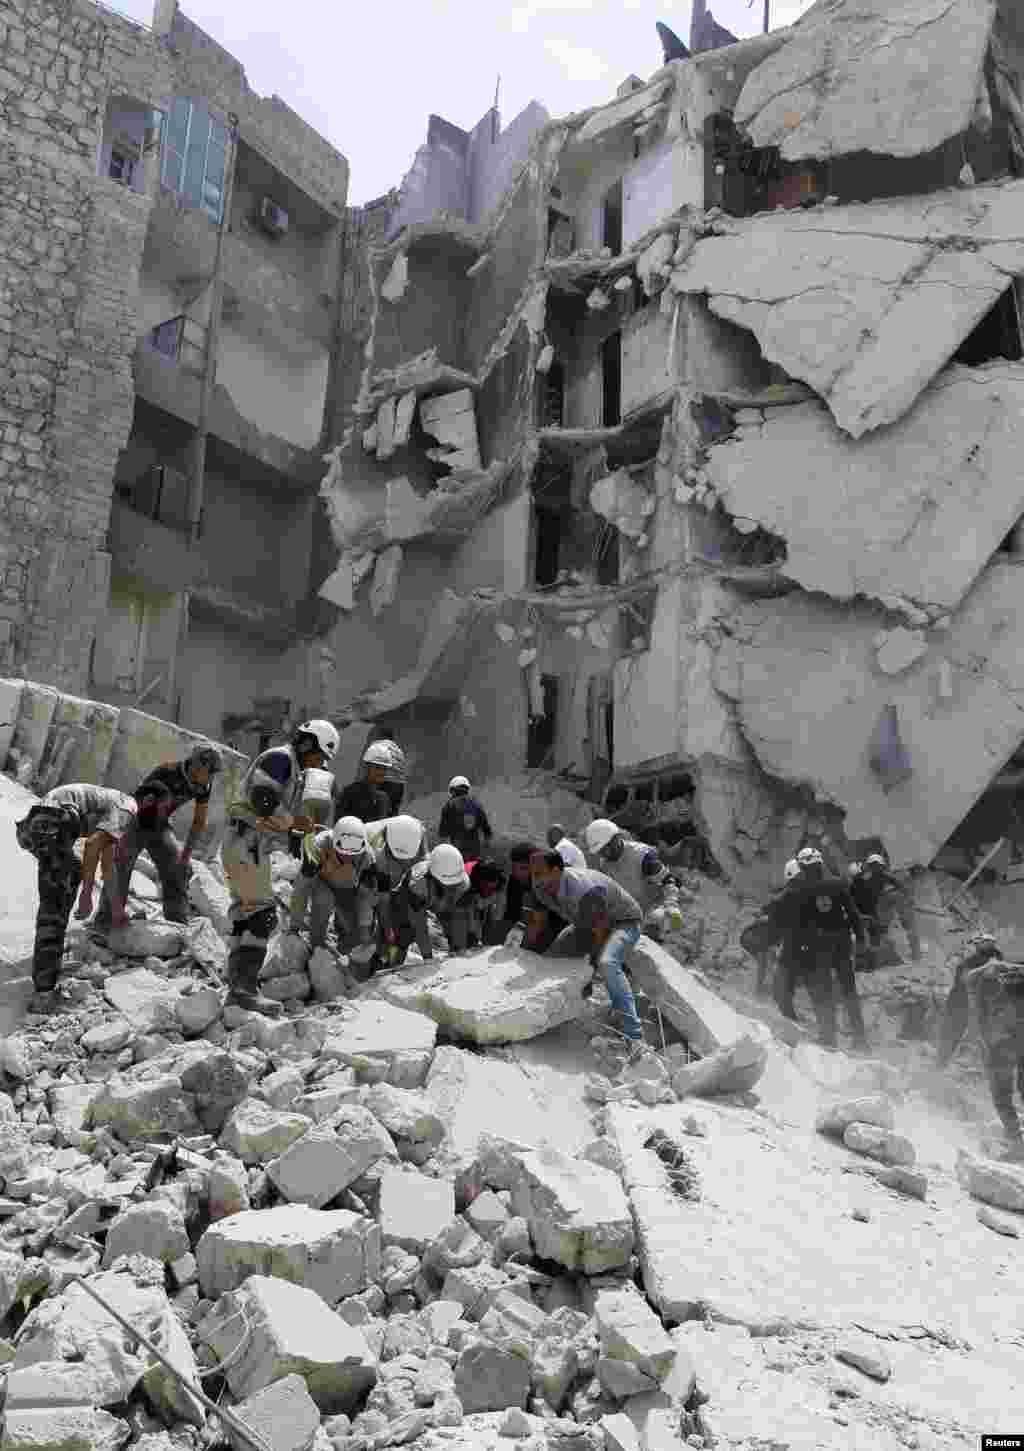 Rescue workers, rebel fighters and civilians search for survivors at a site hit by what activists said was a barrel bomb dropped by forces loyal to President Bashar al-Assad, al-Qarlaq, Aleppo, May 29, 2014.